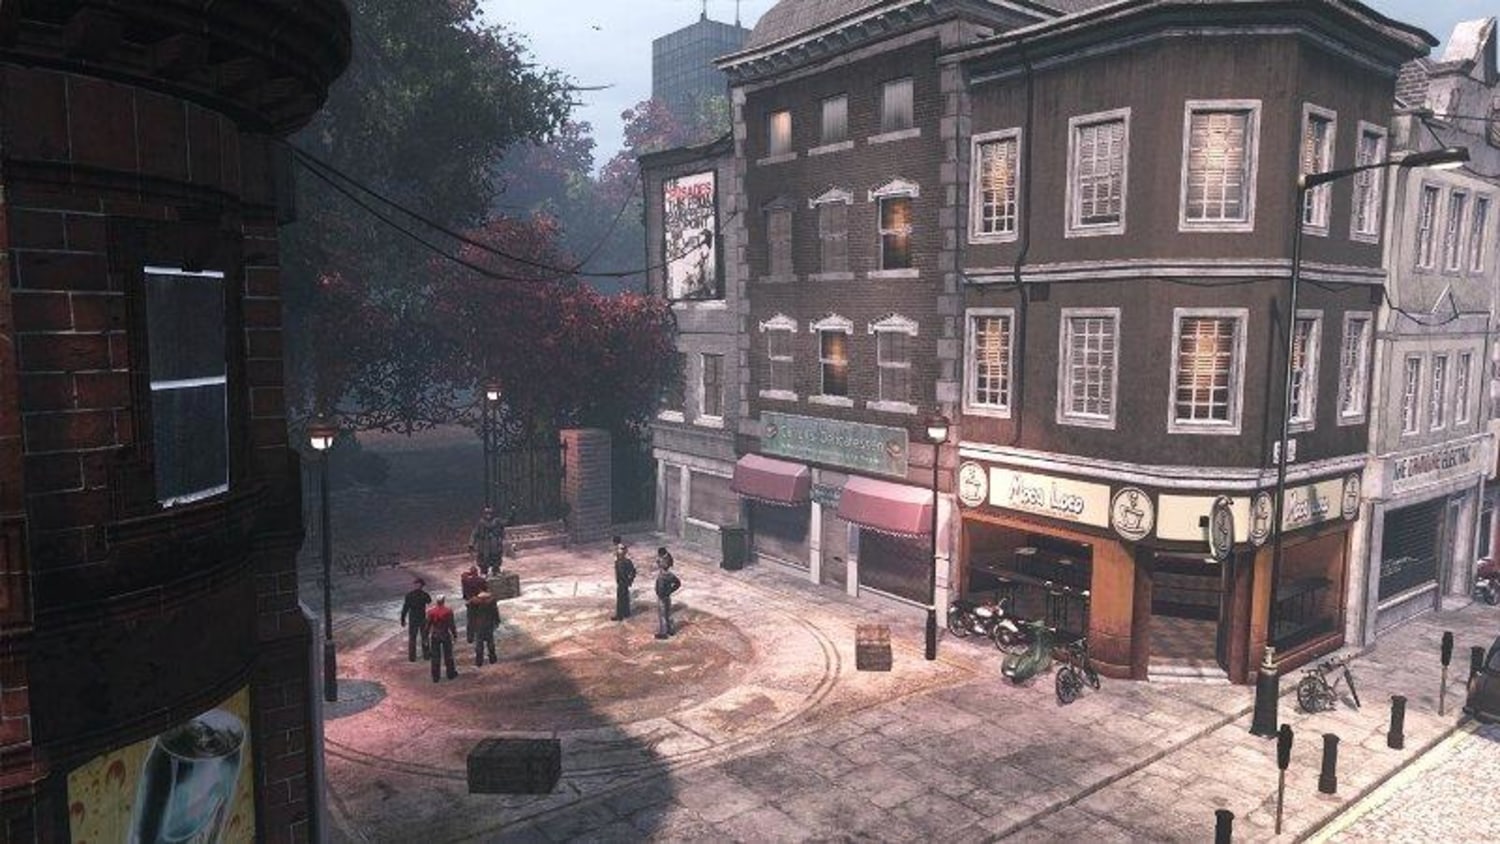 Vampires, werewolves, zombies are real in 'The Secret World